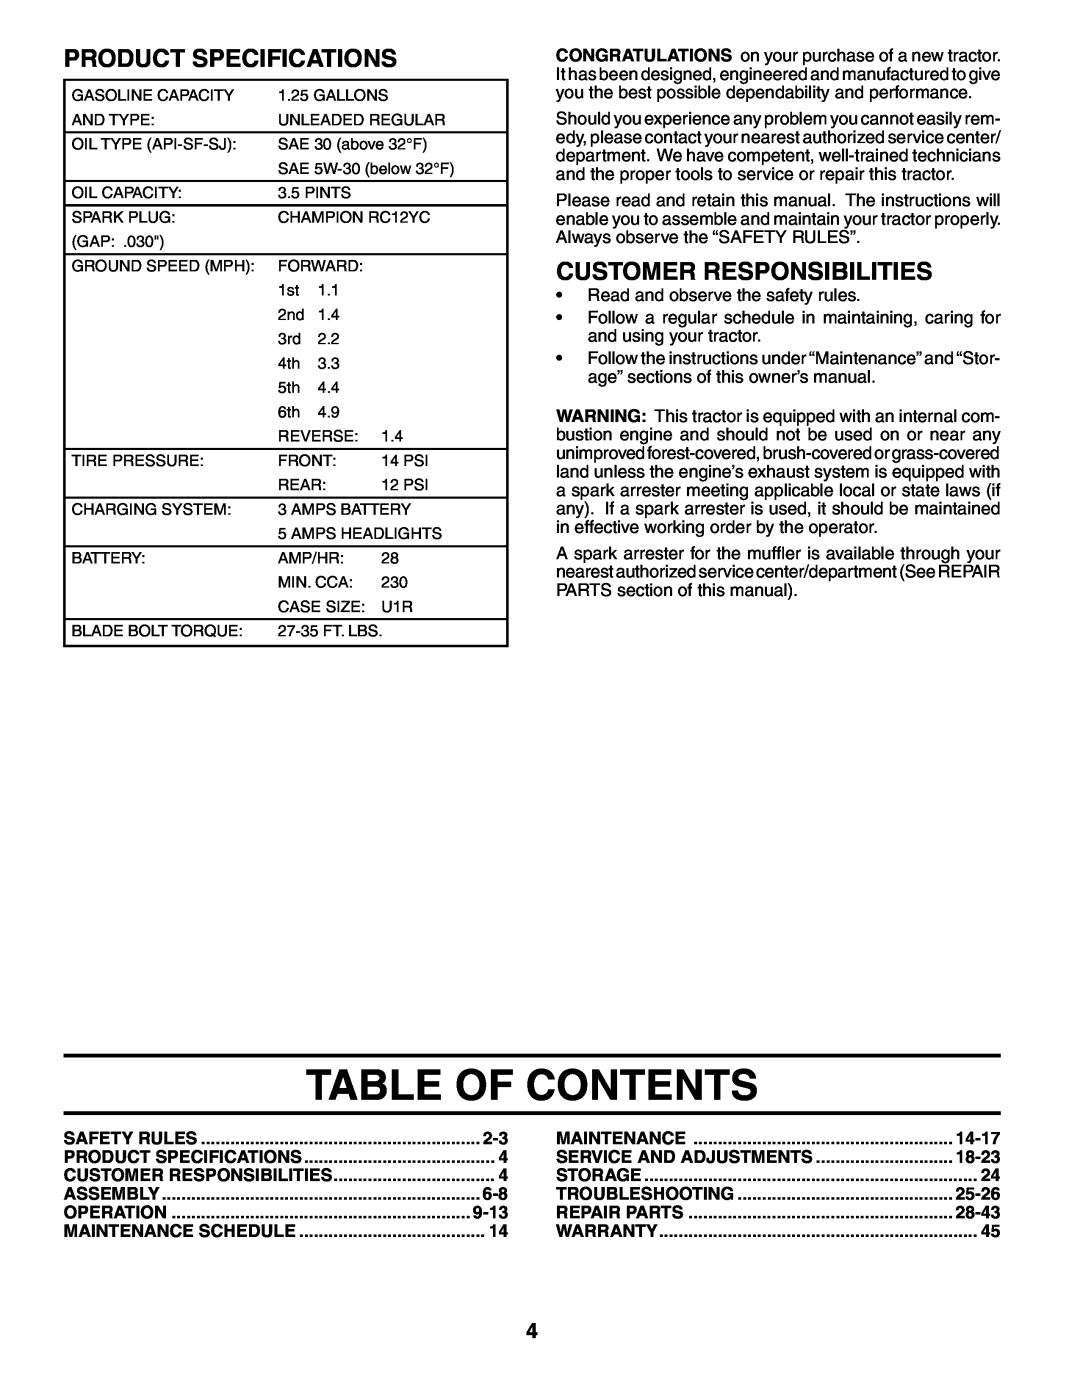 Poulan 954569554, 184518 manual Table Of Contents, Product Specifications, Customer Responsibilities 